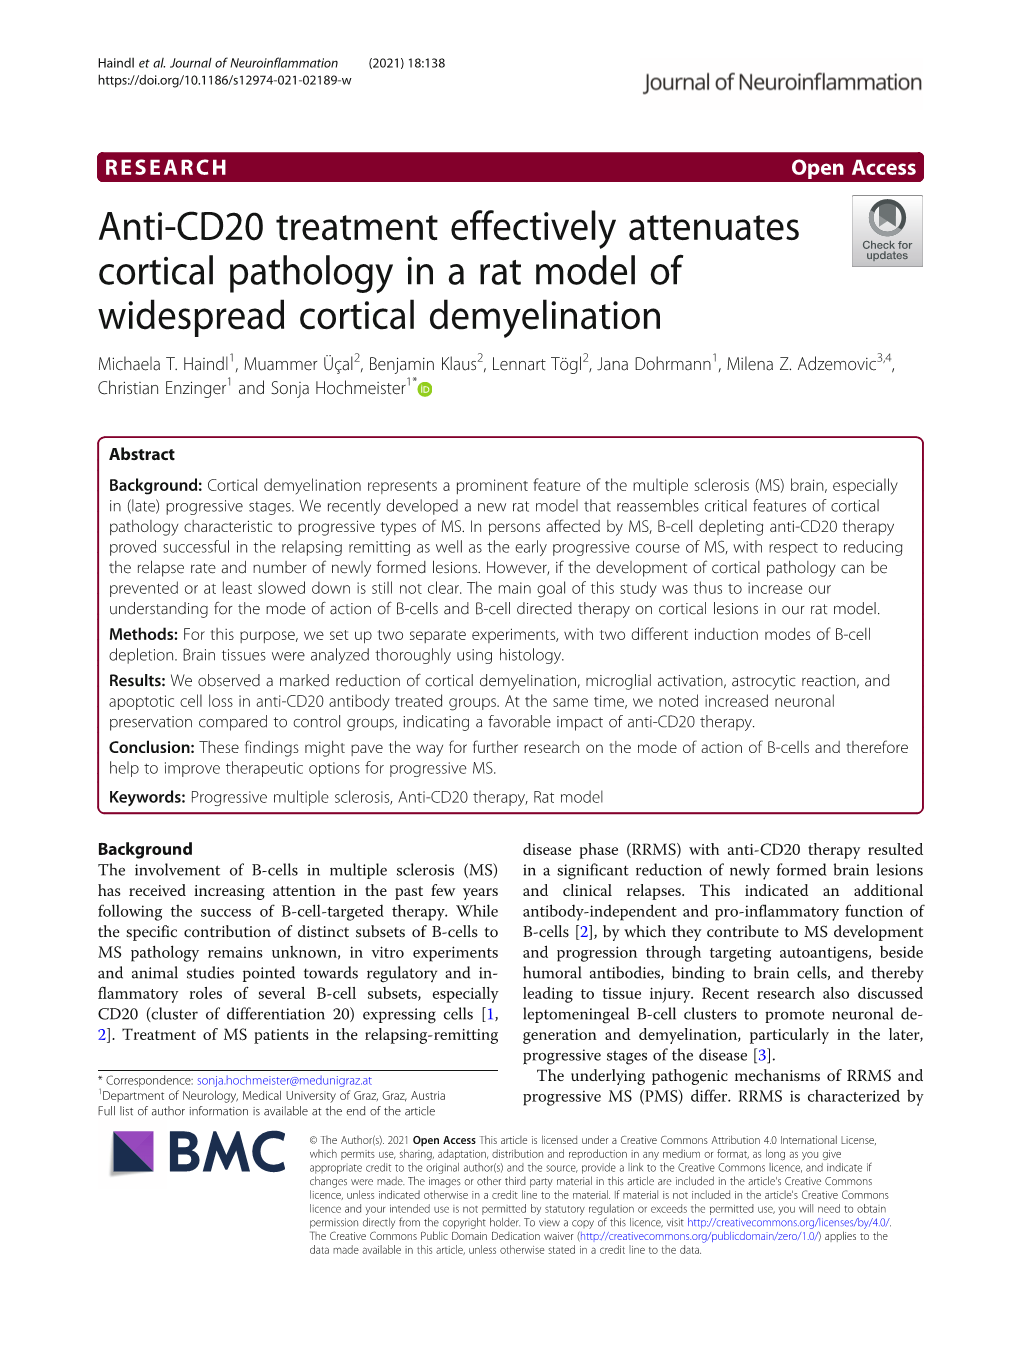 Anti-CD20 Treatment Effectively Attenuates Cortical Pathology in a Rat Model of Widespread Cortical Demyelination Michaela T